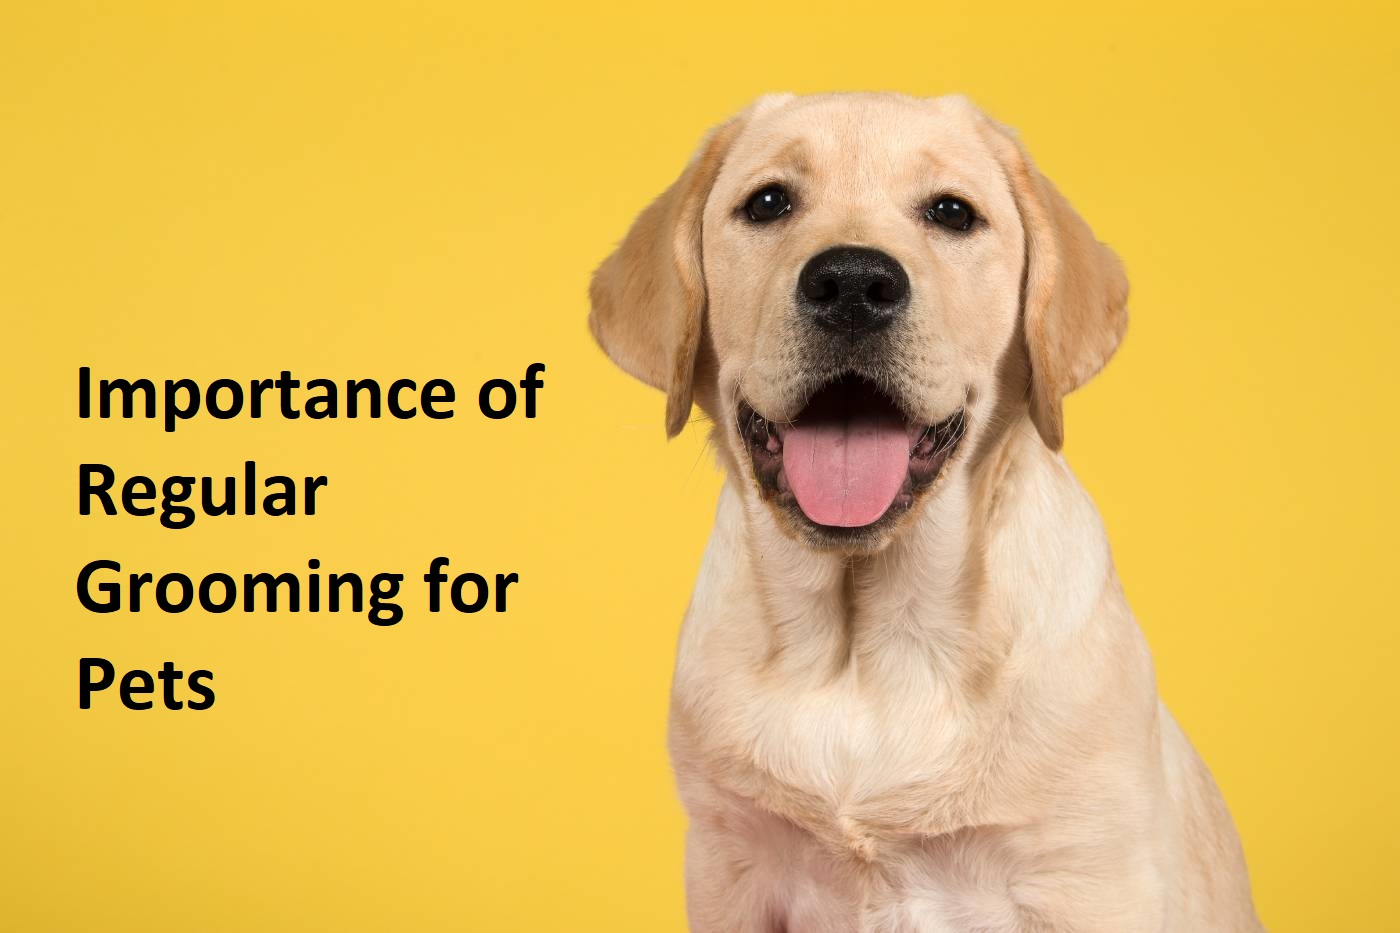 Importance of Regular Grooming for Pets